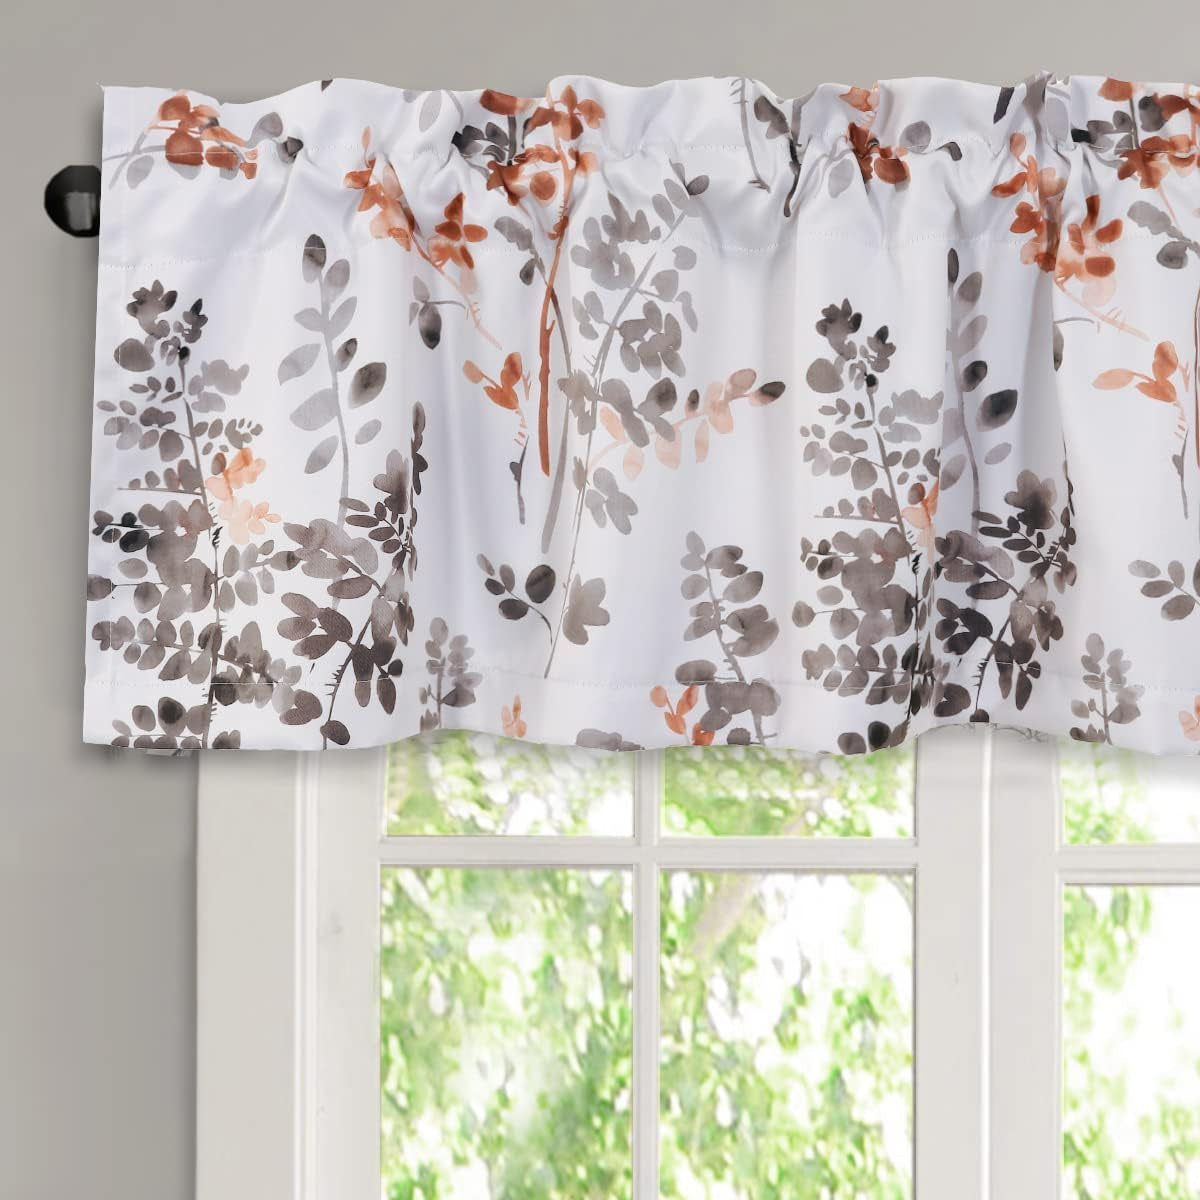 H.VERSAILTEX Valance for Kitchen Windows/Bathroom/Living Room/Bedroom Blackout Window Valance Thermal Insulated Rod Pocket Valance Curtains, 52" W X 18" L, Floral Pattern in Grey and Yellow, 2 Panels